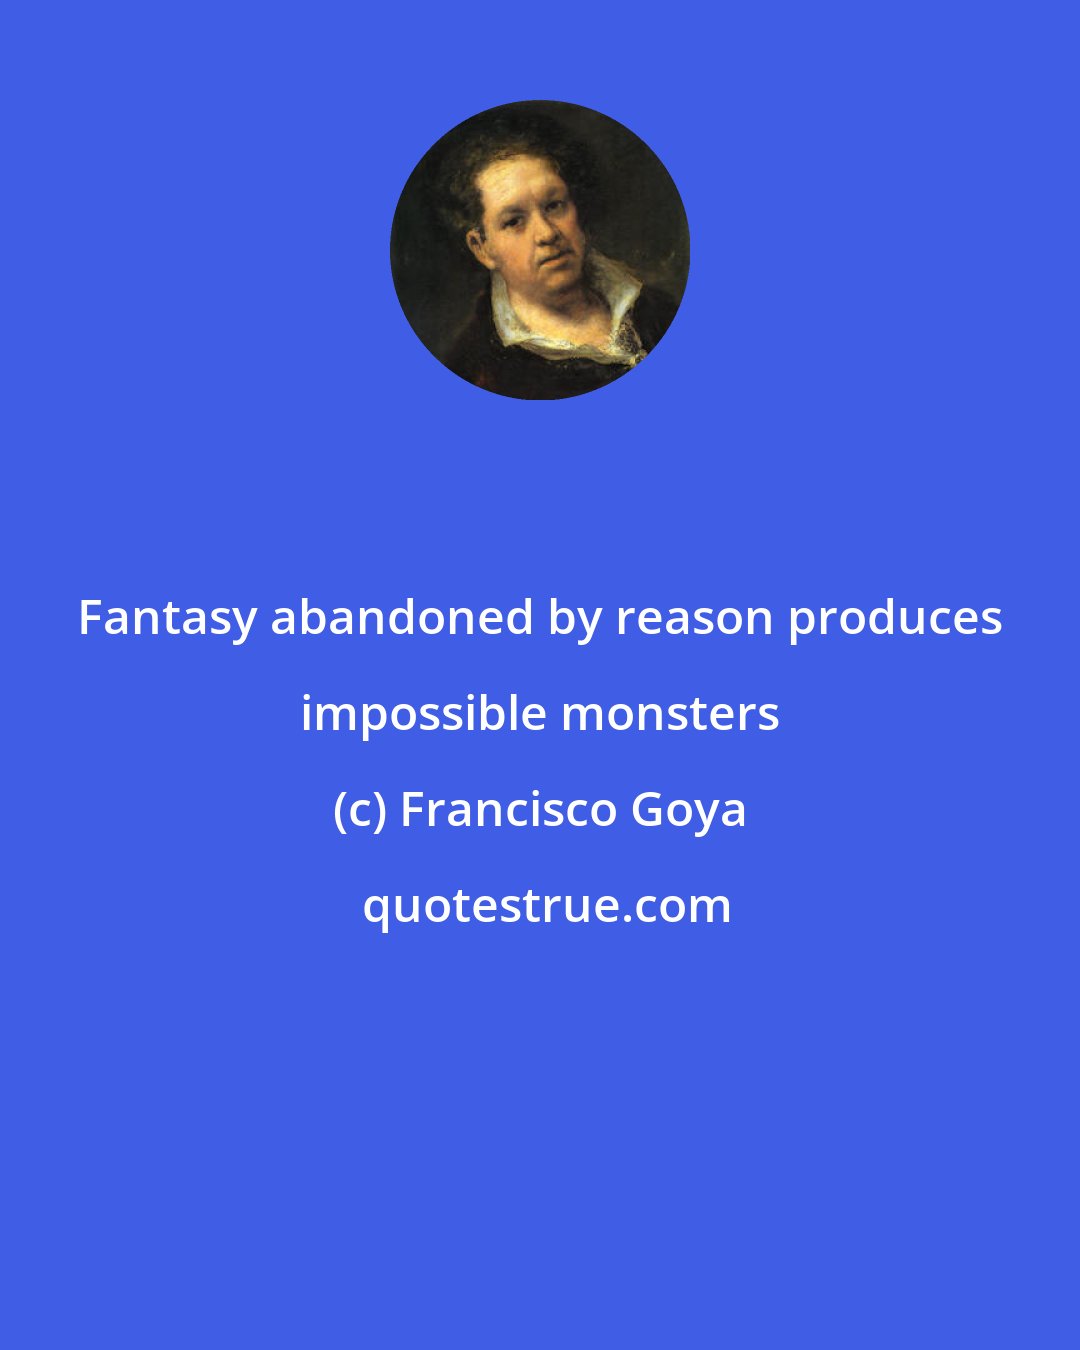 Francisco Goya: Fantasy abandoned by reason produces impossible monsters